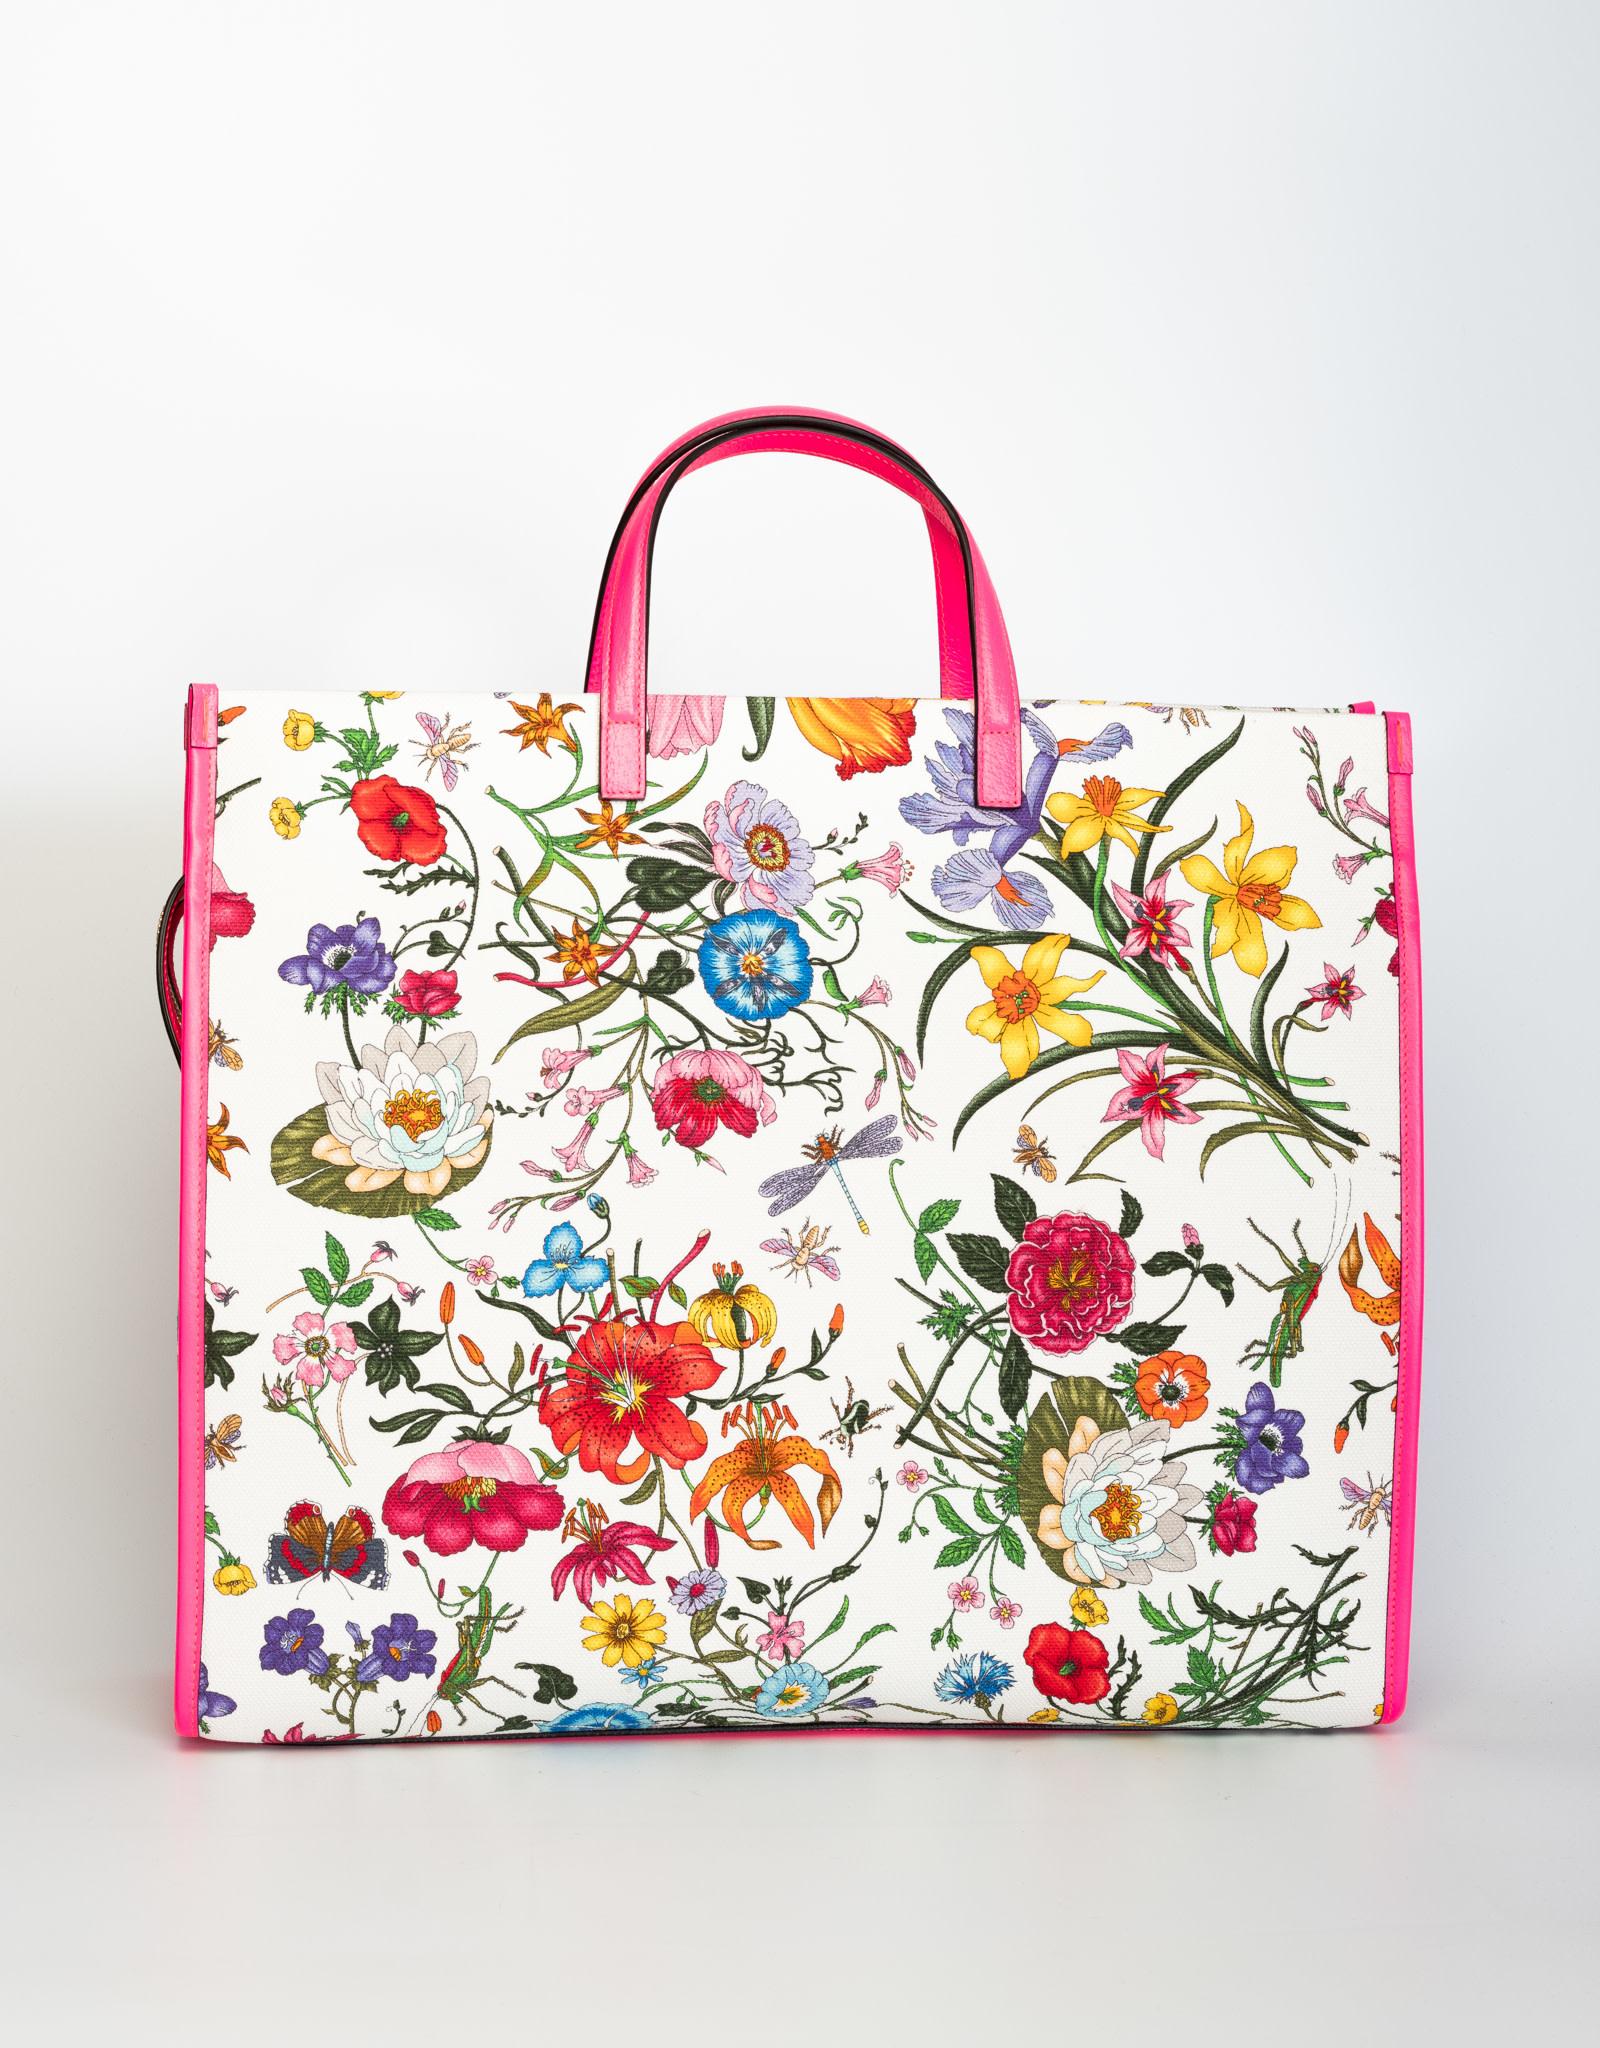 This Gucci tote bag is made out of white and pink cotton fabric with floral print and leather trim. Featuring round top handles, gold-tone hardware, a top zip fastening, a main internal compartment and an internal logo patch. 
     

COLOR: